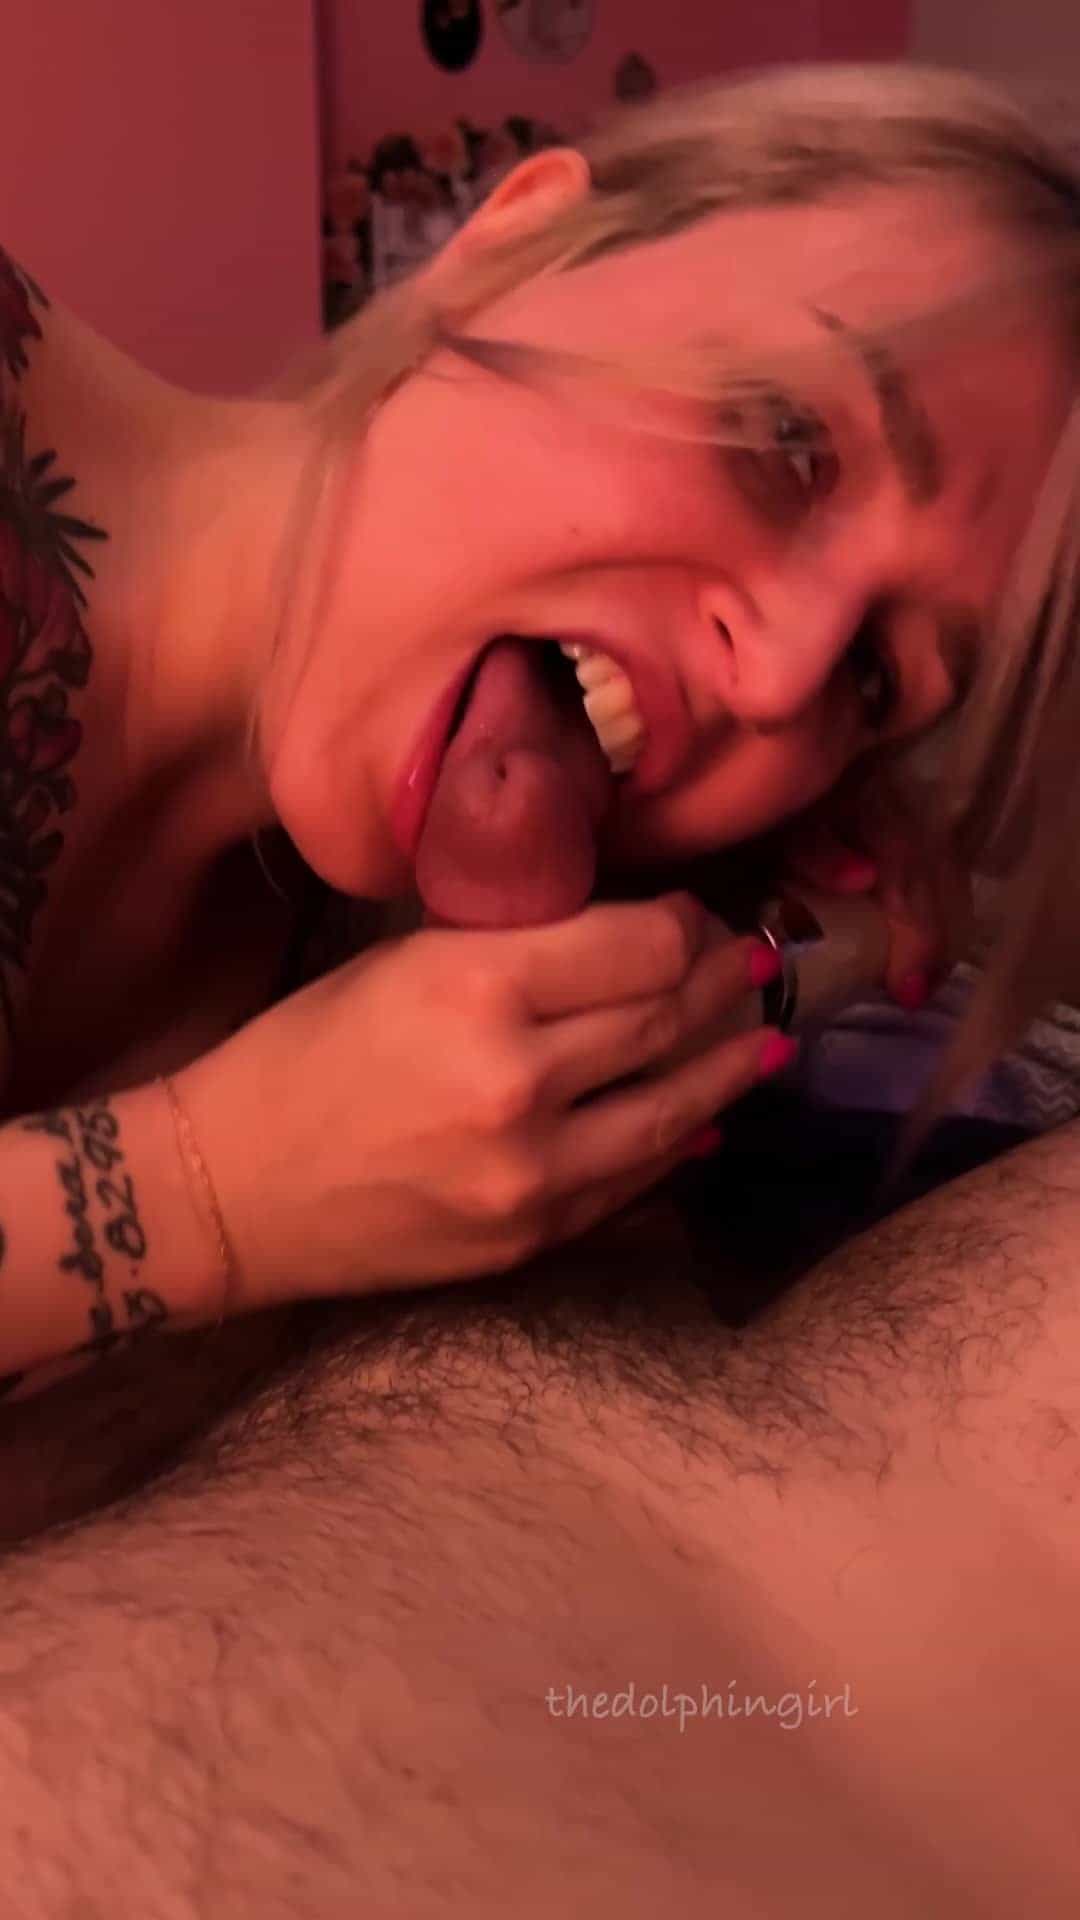 Milking a huge load out of him with both my tongue and a toy